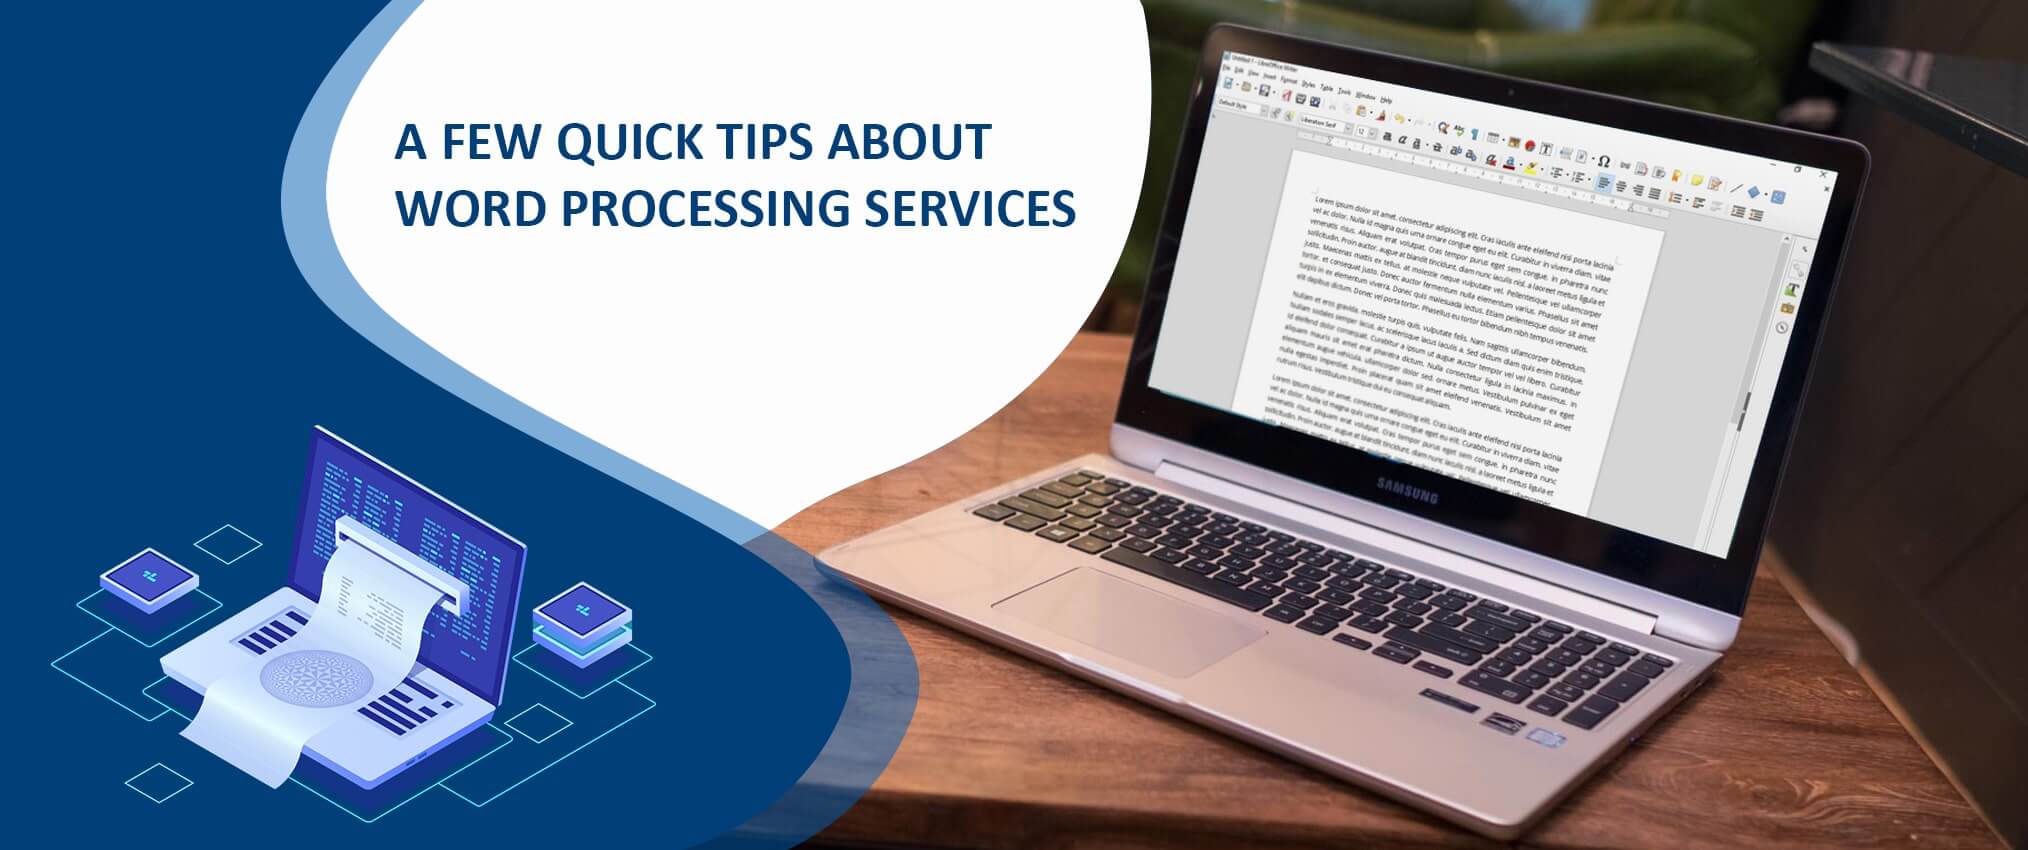 word processing services